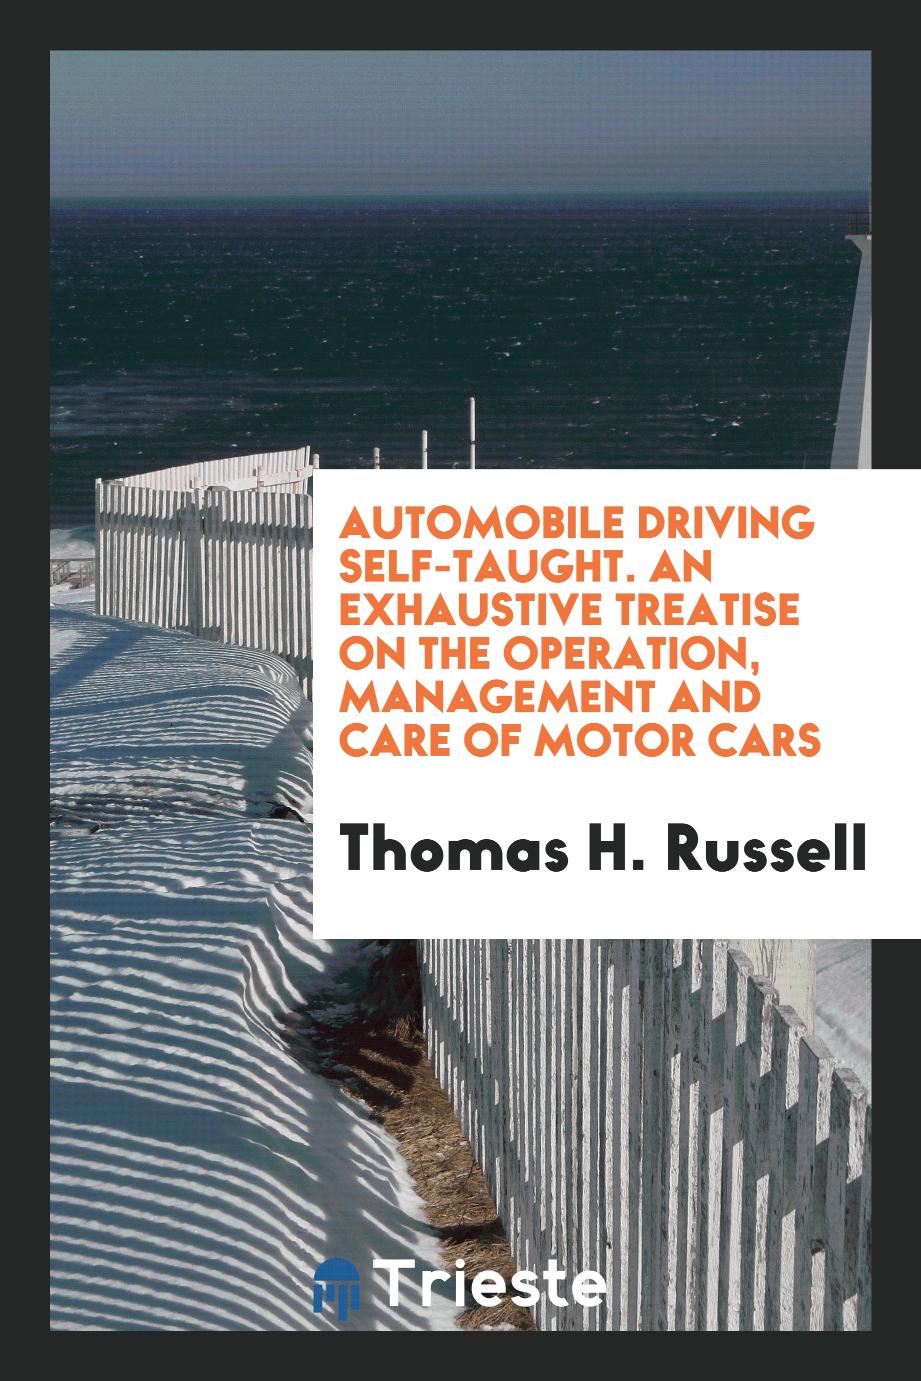 Automobile Driving Self-Taught. An Exhaustive Treatise on the Operation, Management and Care of Motor Cars